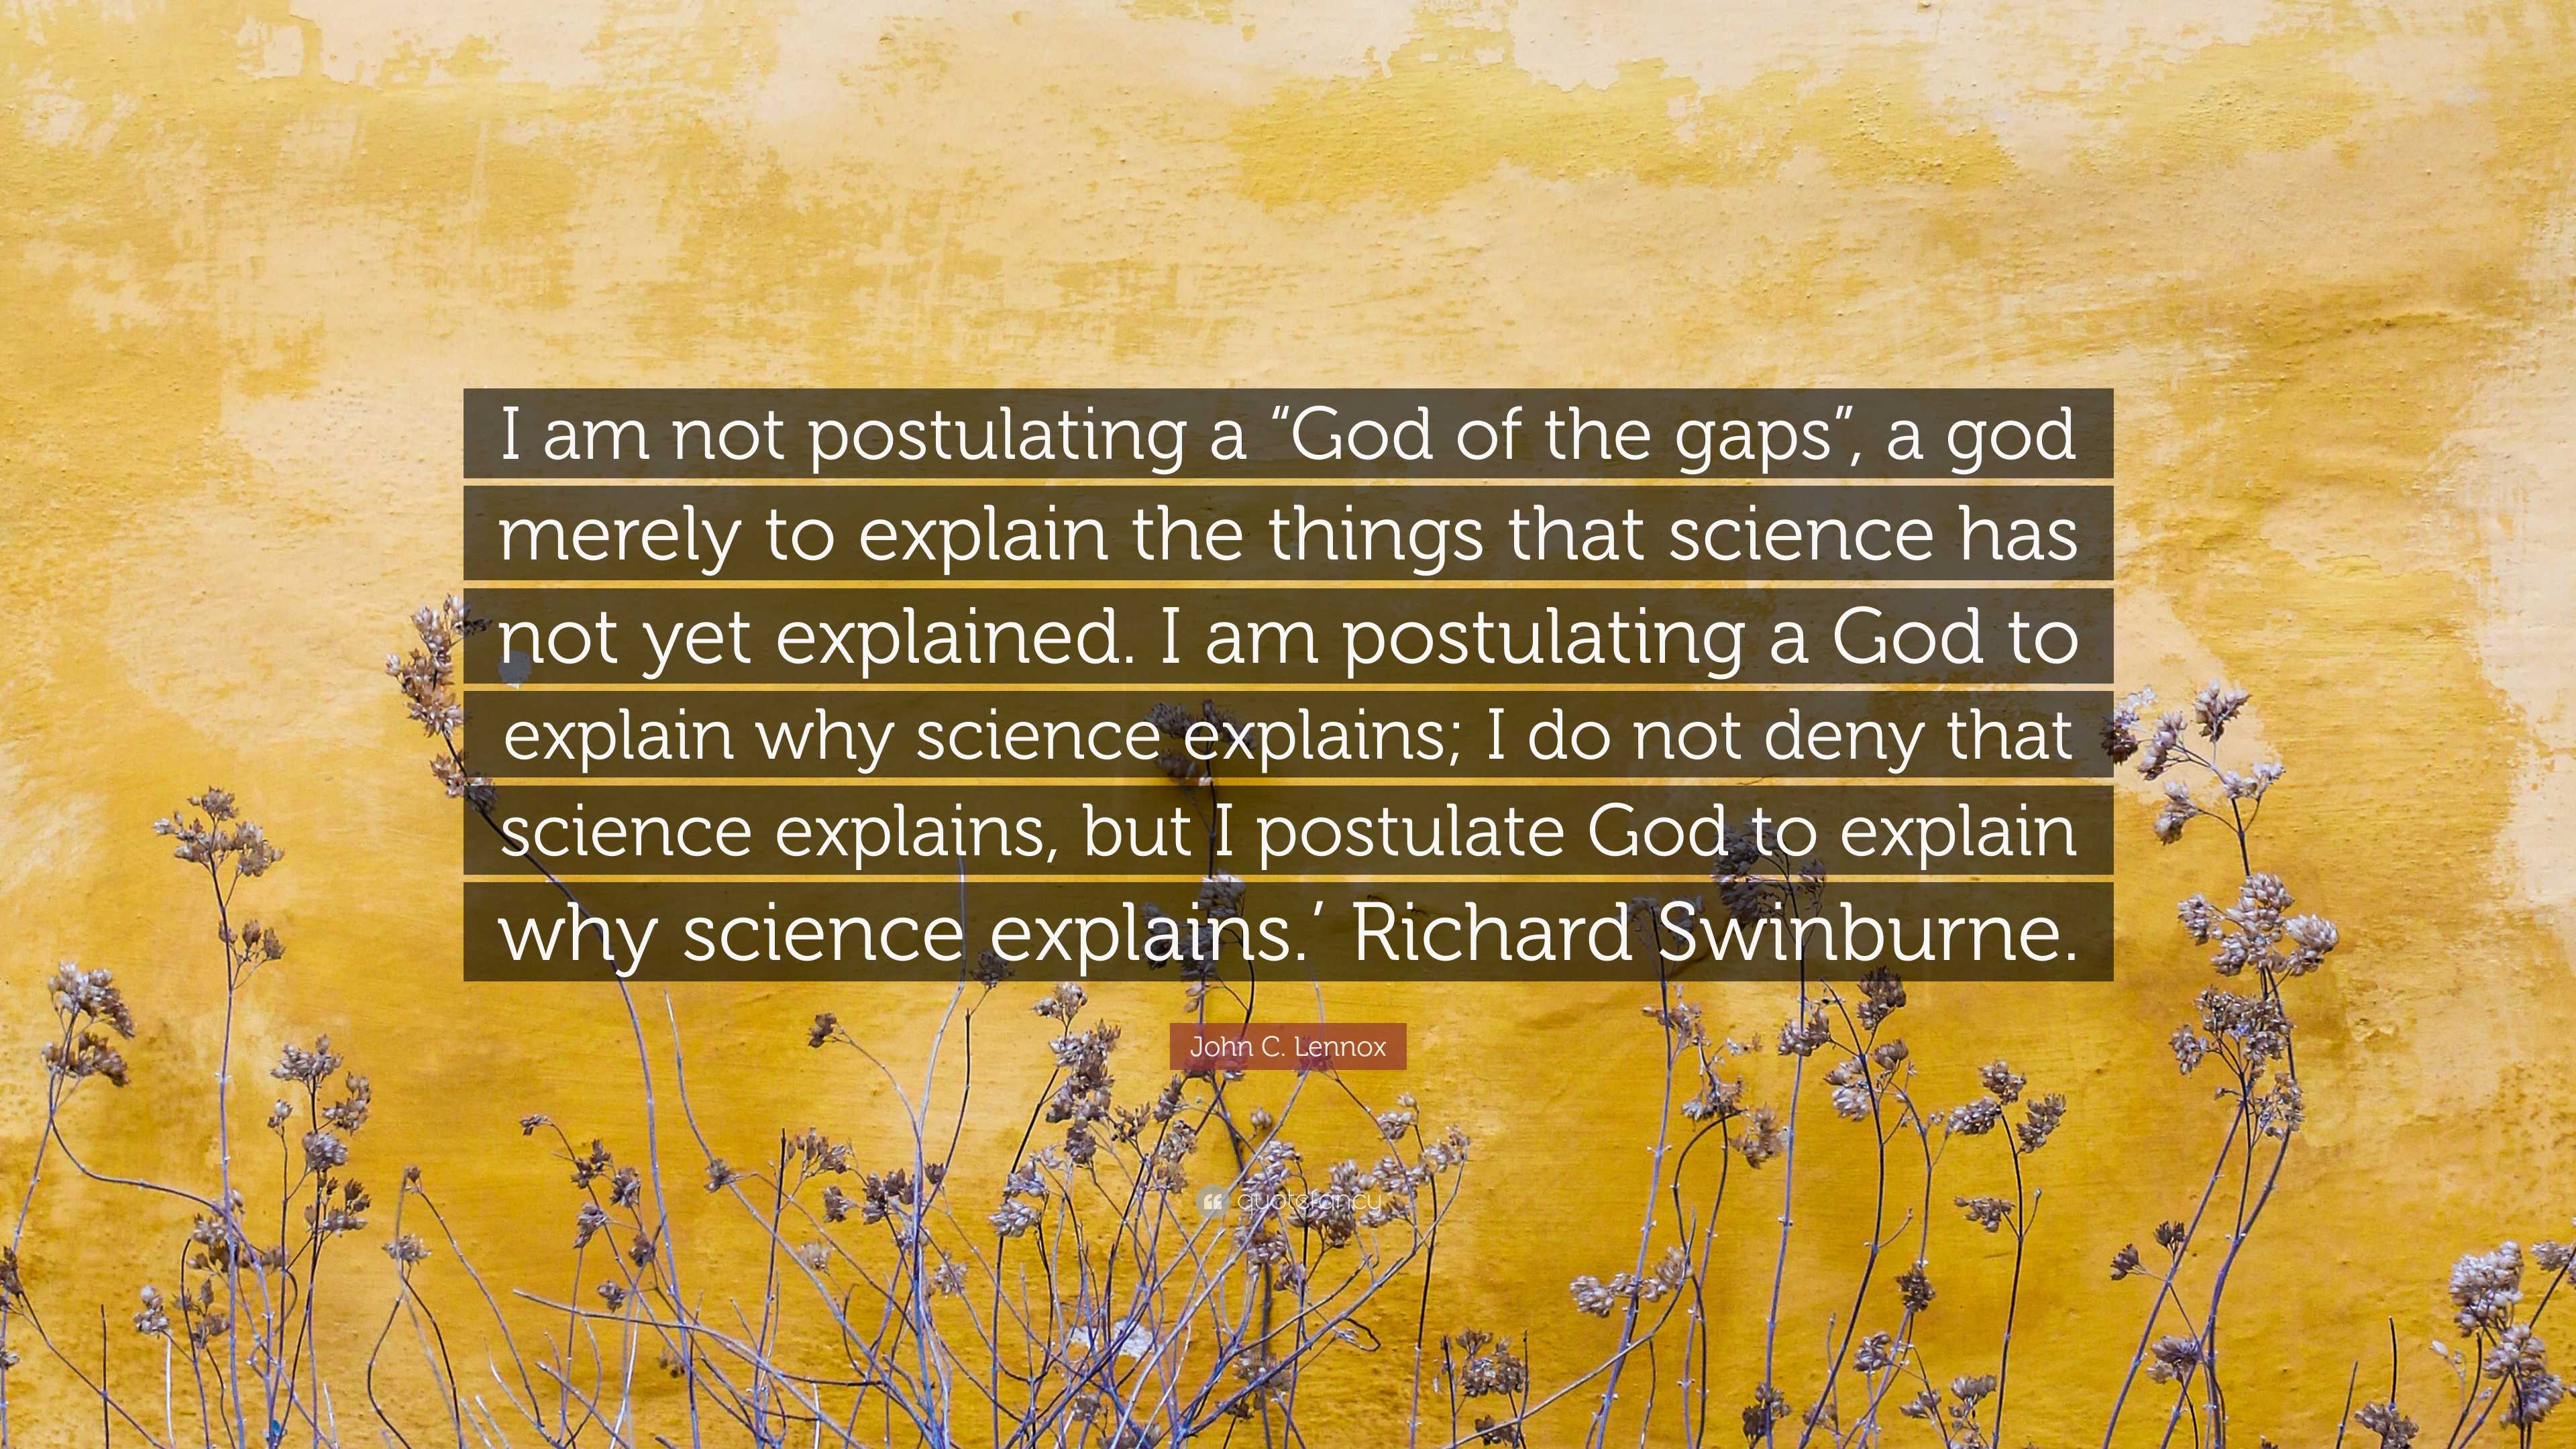 John C Lennox Quote “i Am Not Postulating A “god Of The Gaps” A God Merely To Explain The 1021